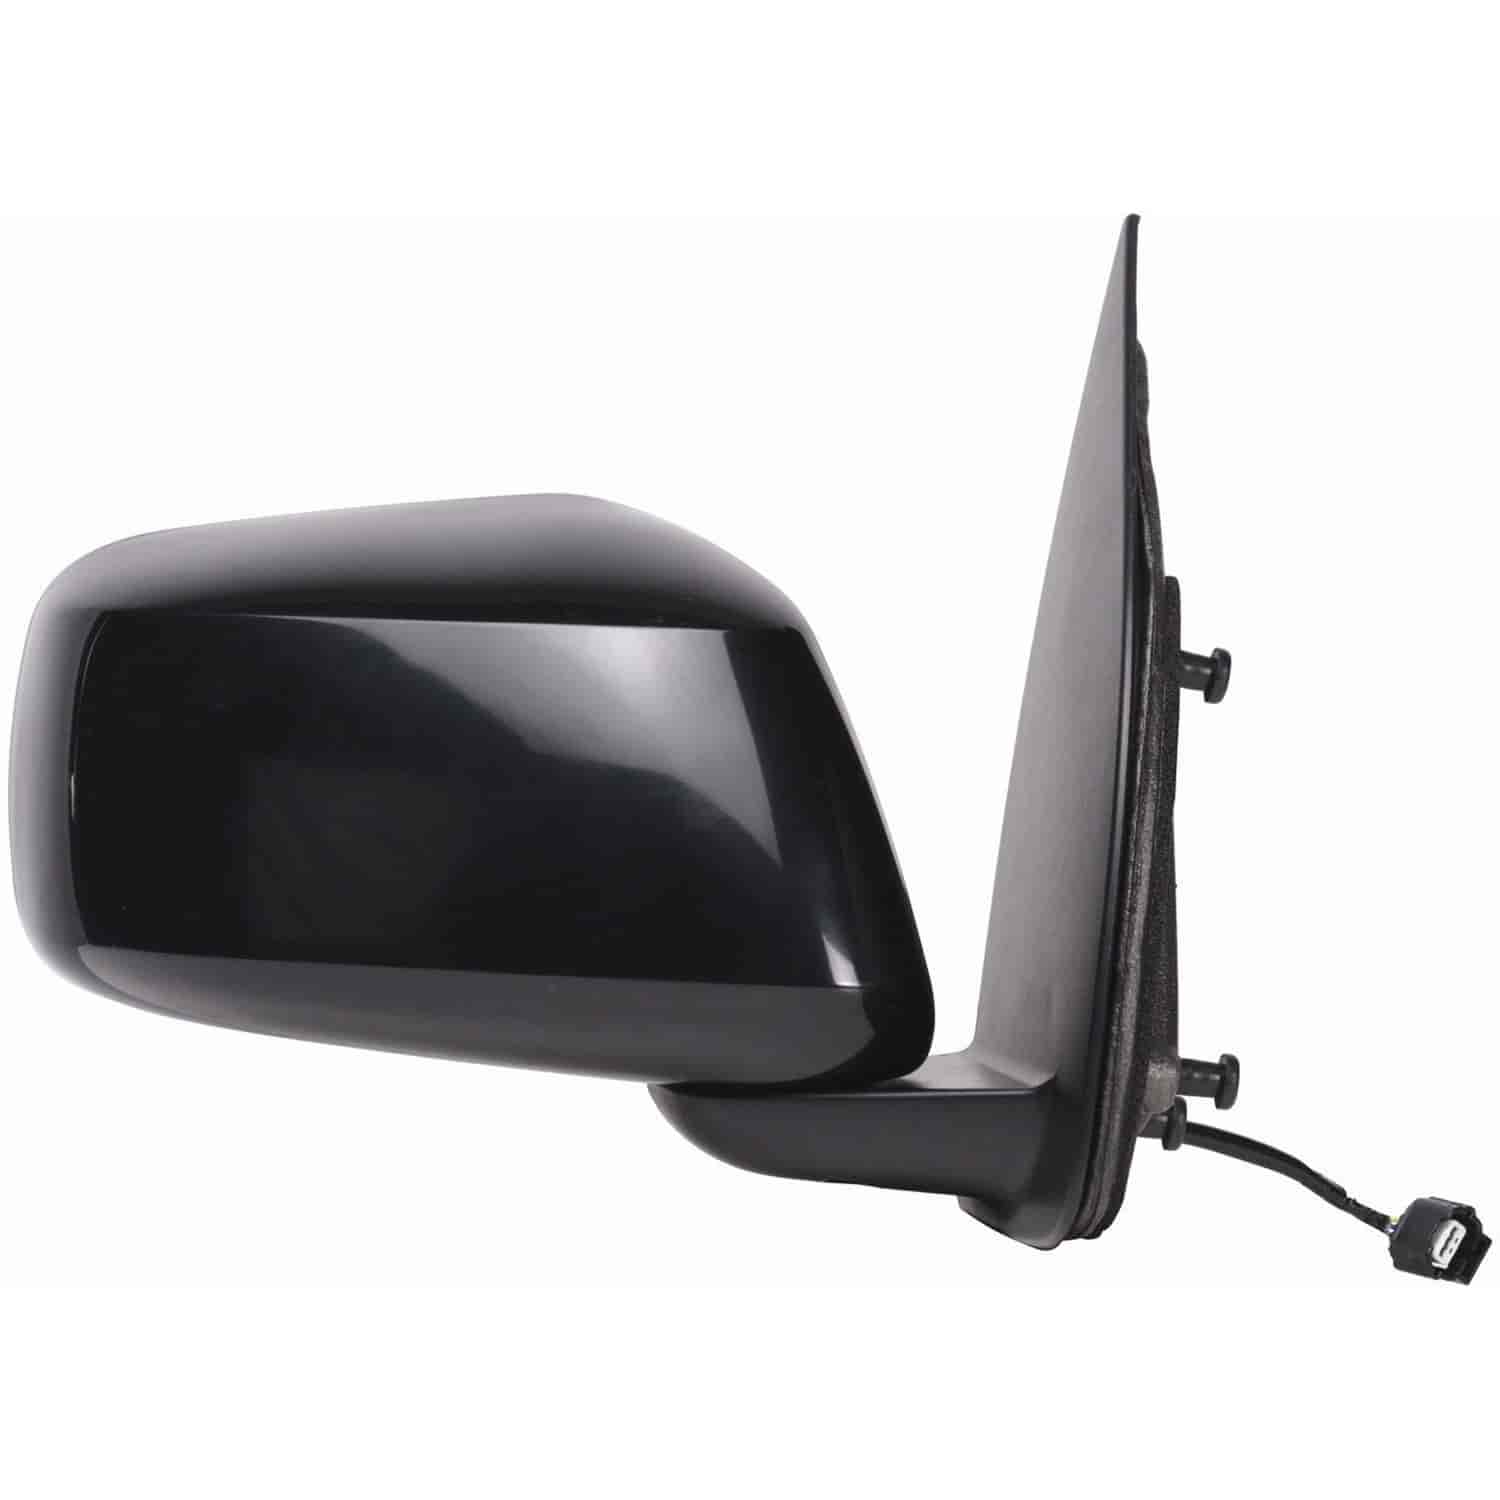 OEM Style Replacement mirror for 05-14 Nissan Frontier extended/crewcab Xterra 05-12 Pathfinder 05-1